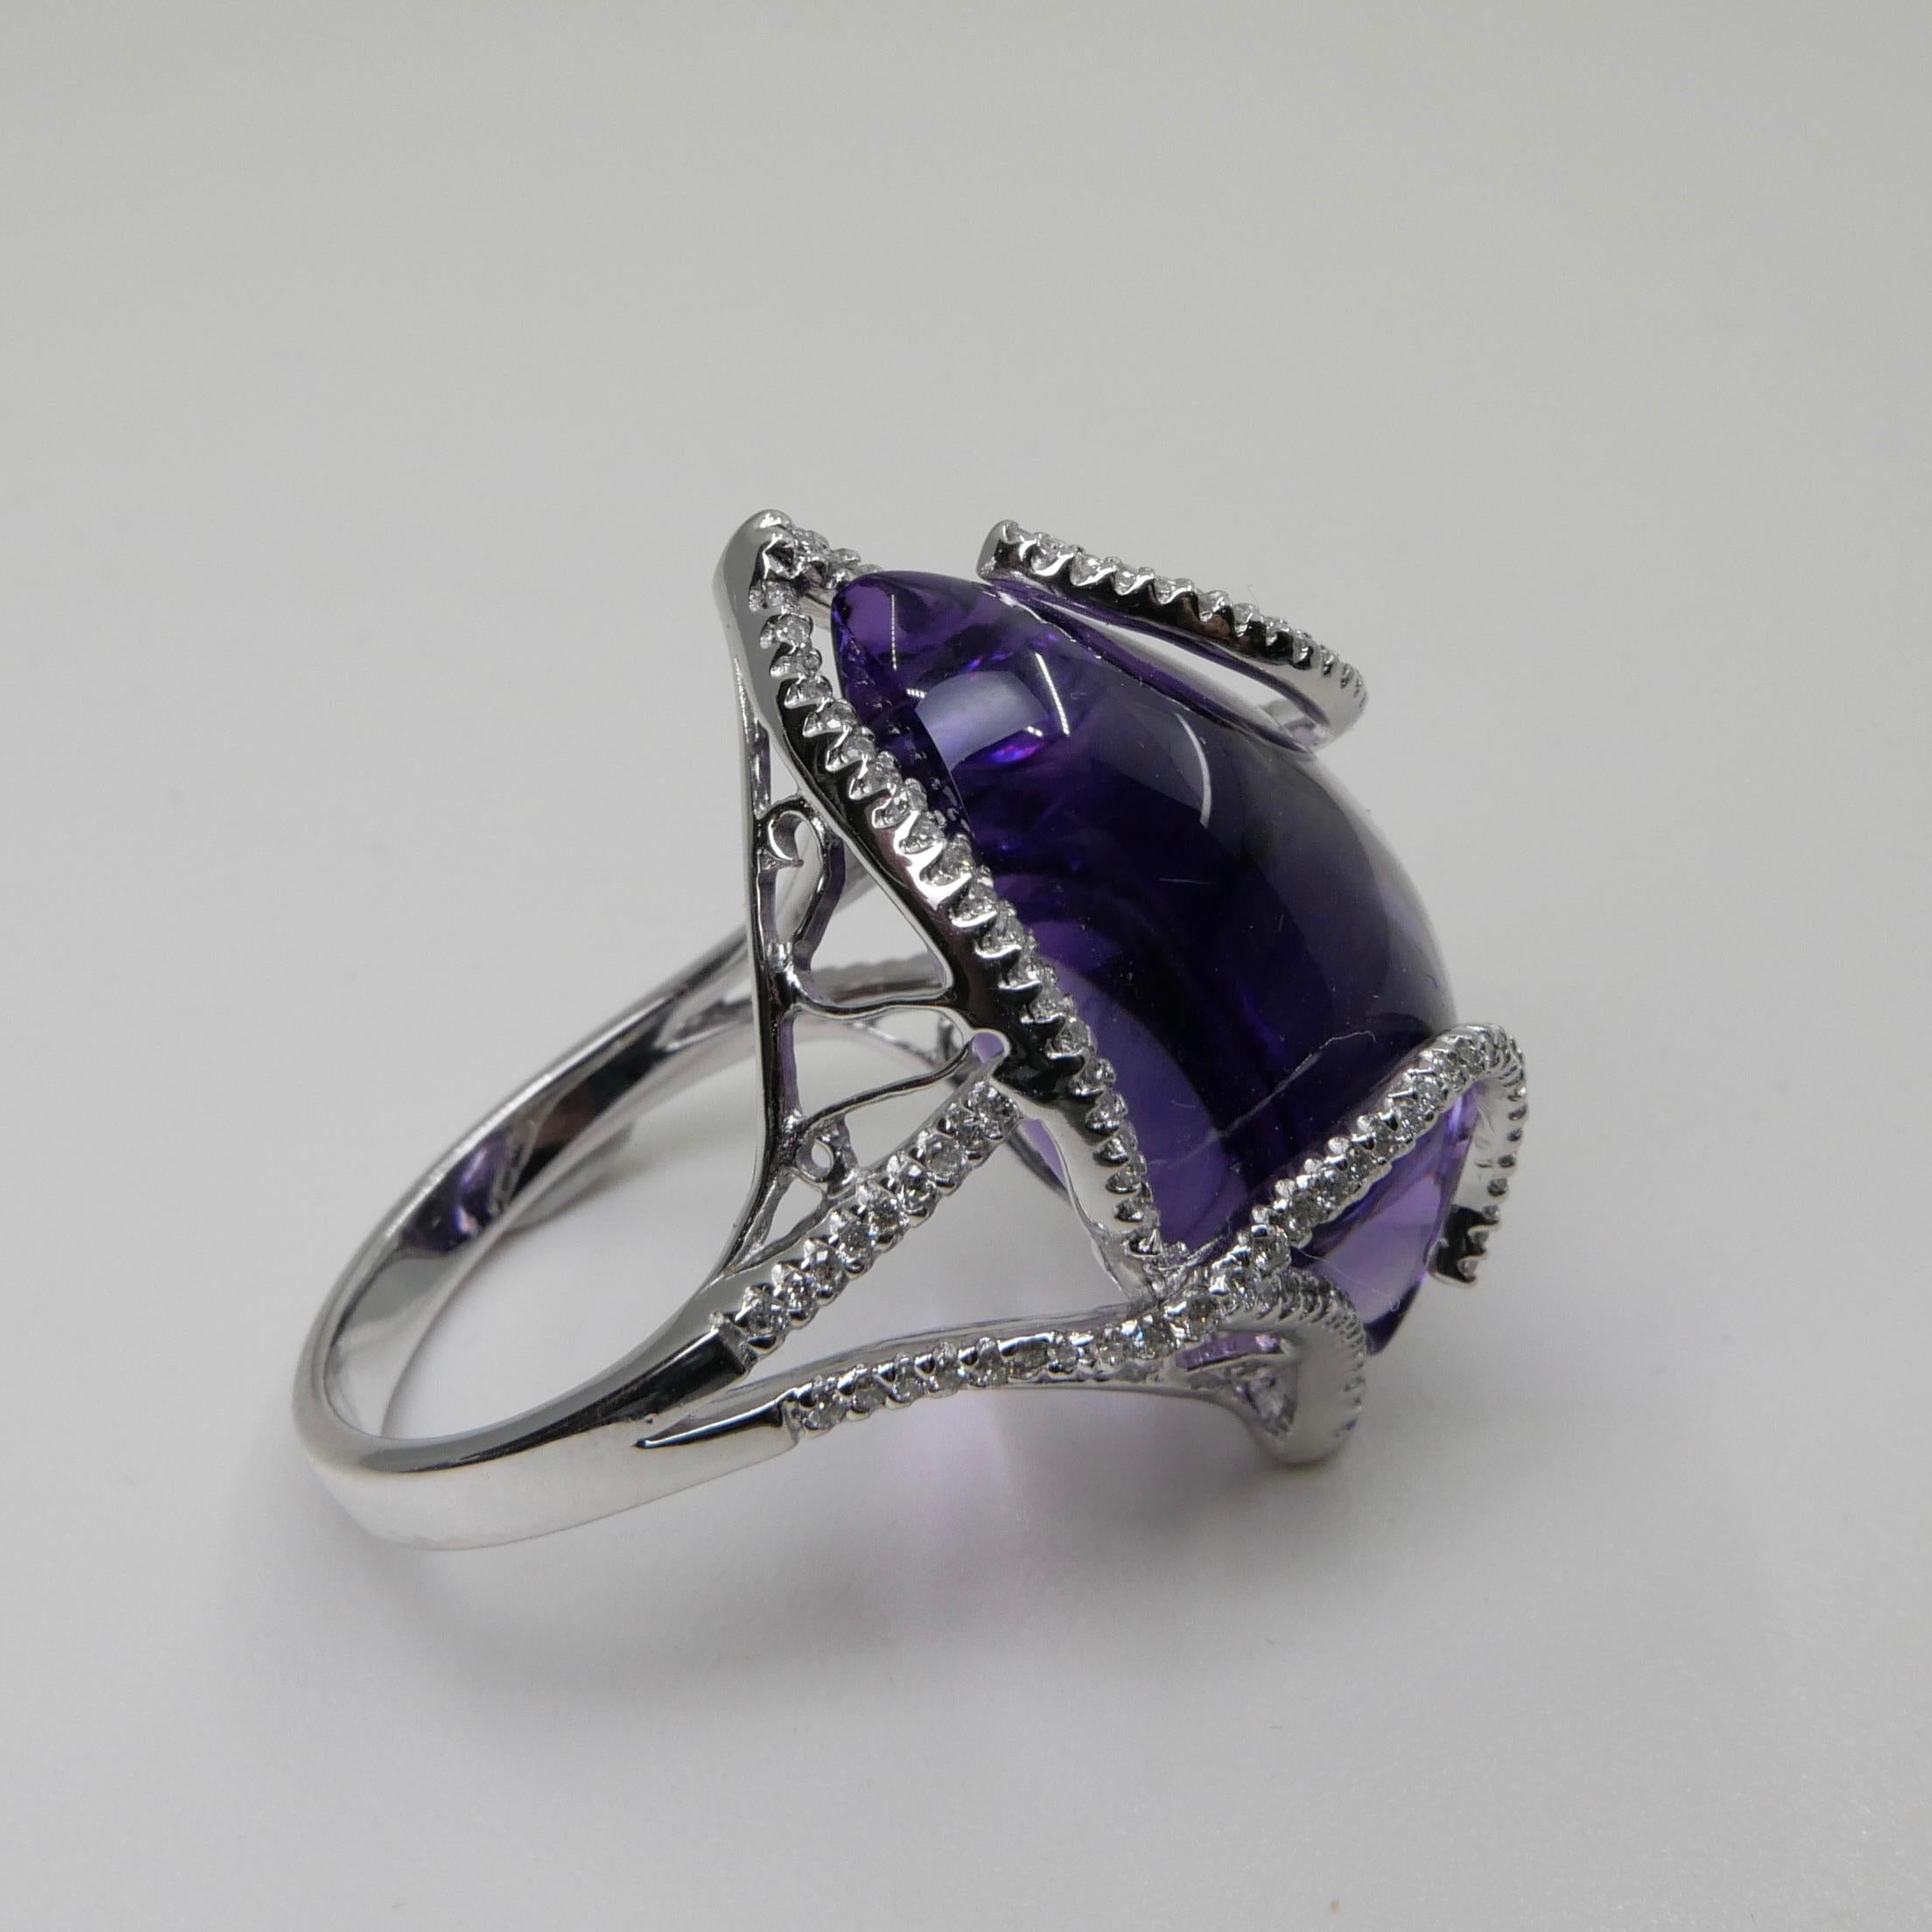 23 Carat Amethyst & Diamond Cocktail Ring. Large Contemporary Statement Ring.    For Sale 11